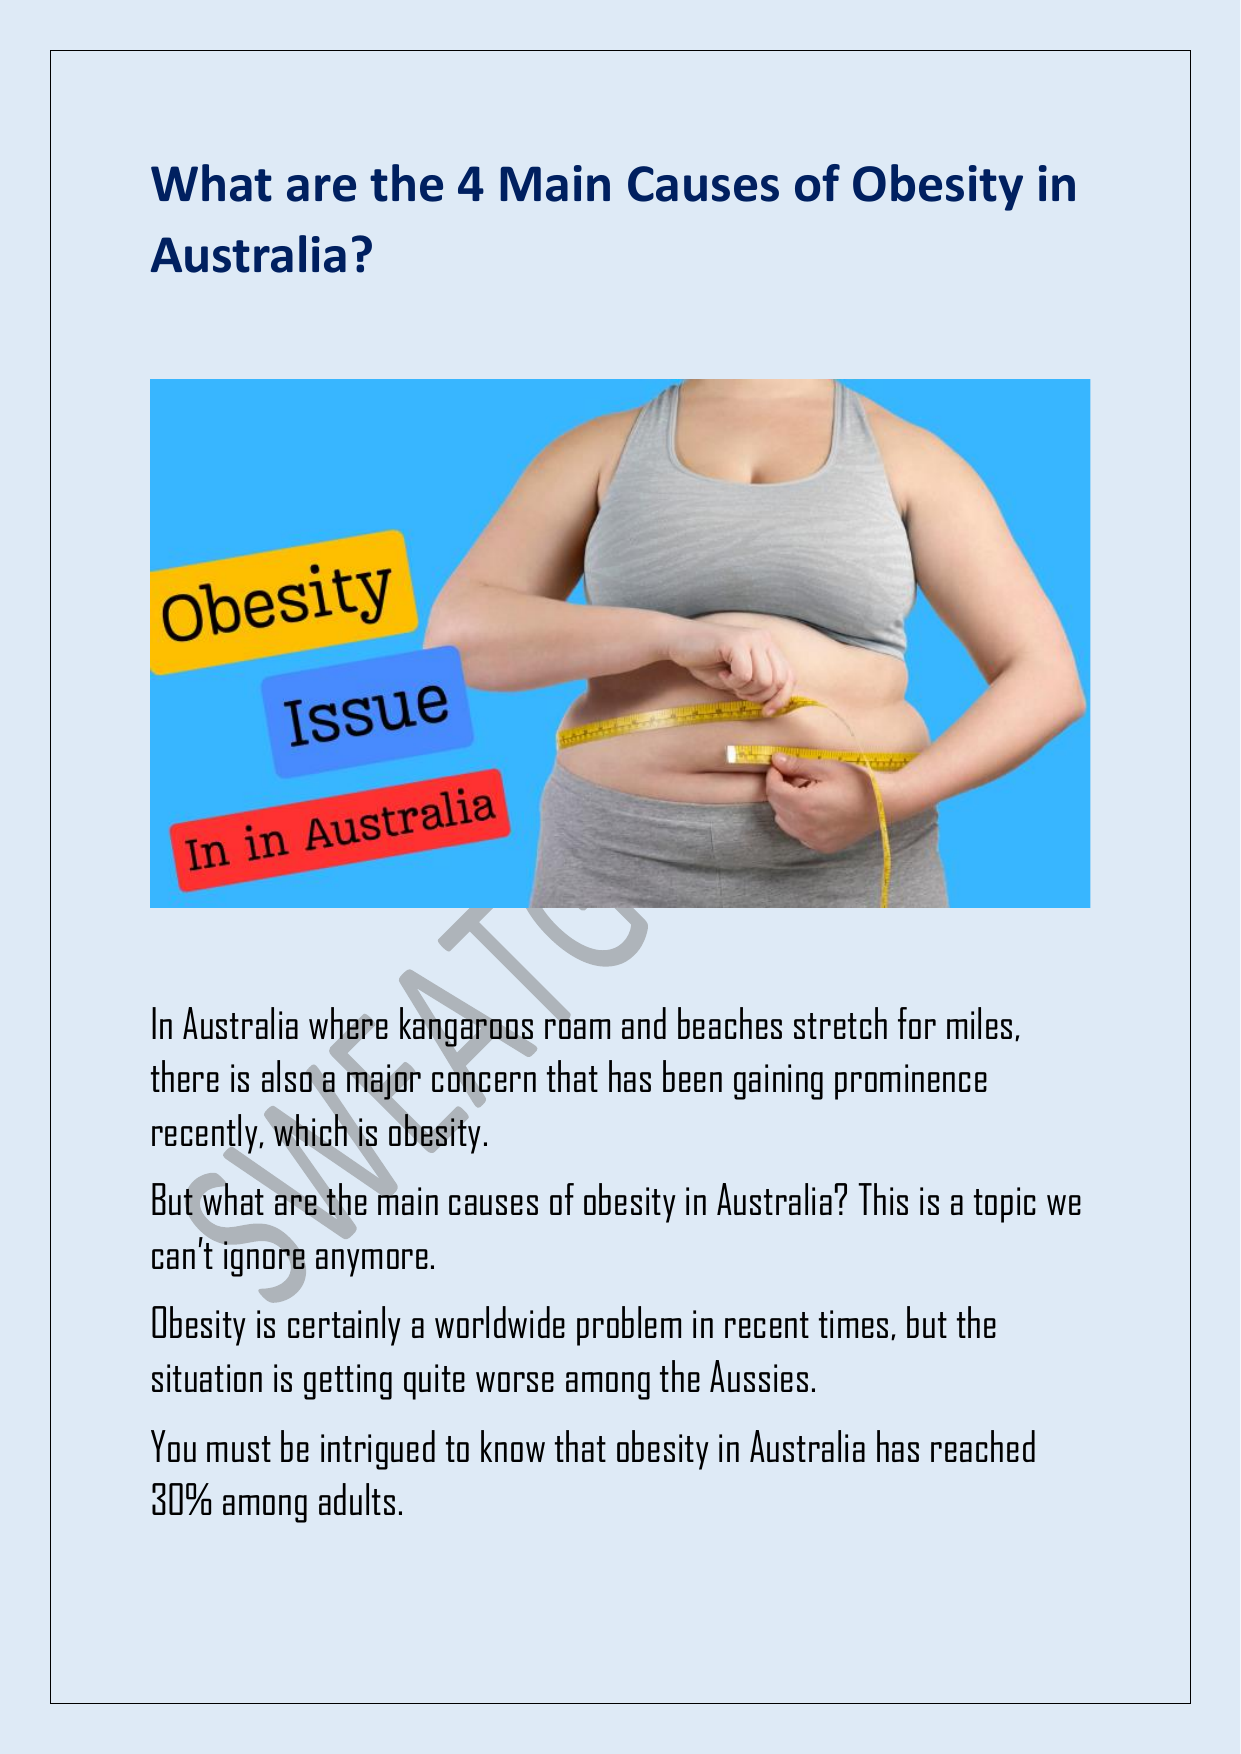 What are some of the major causes of obesity in Australia?